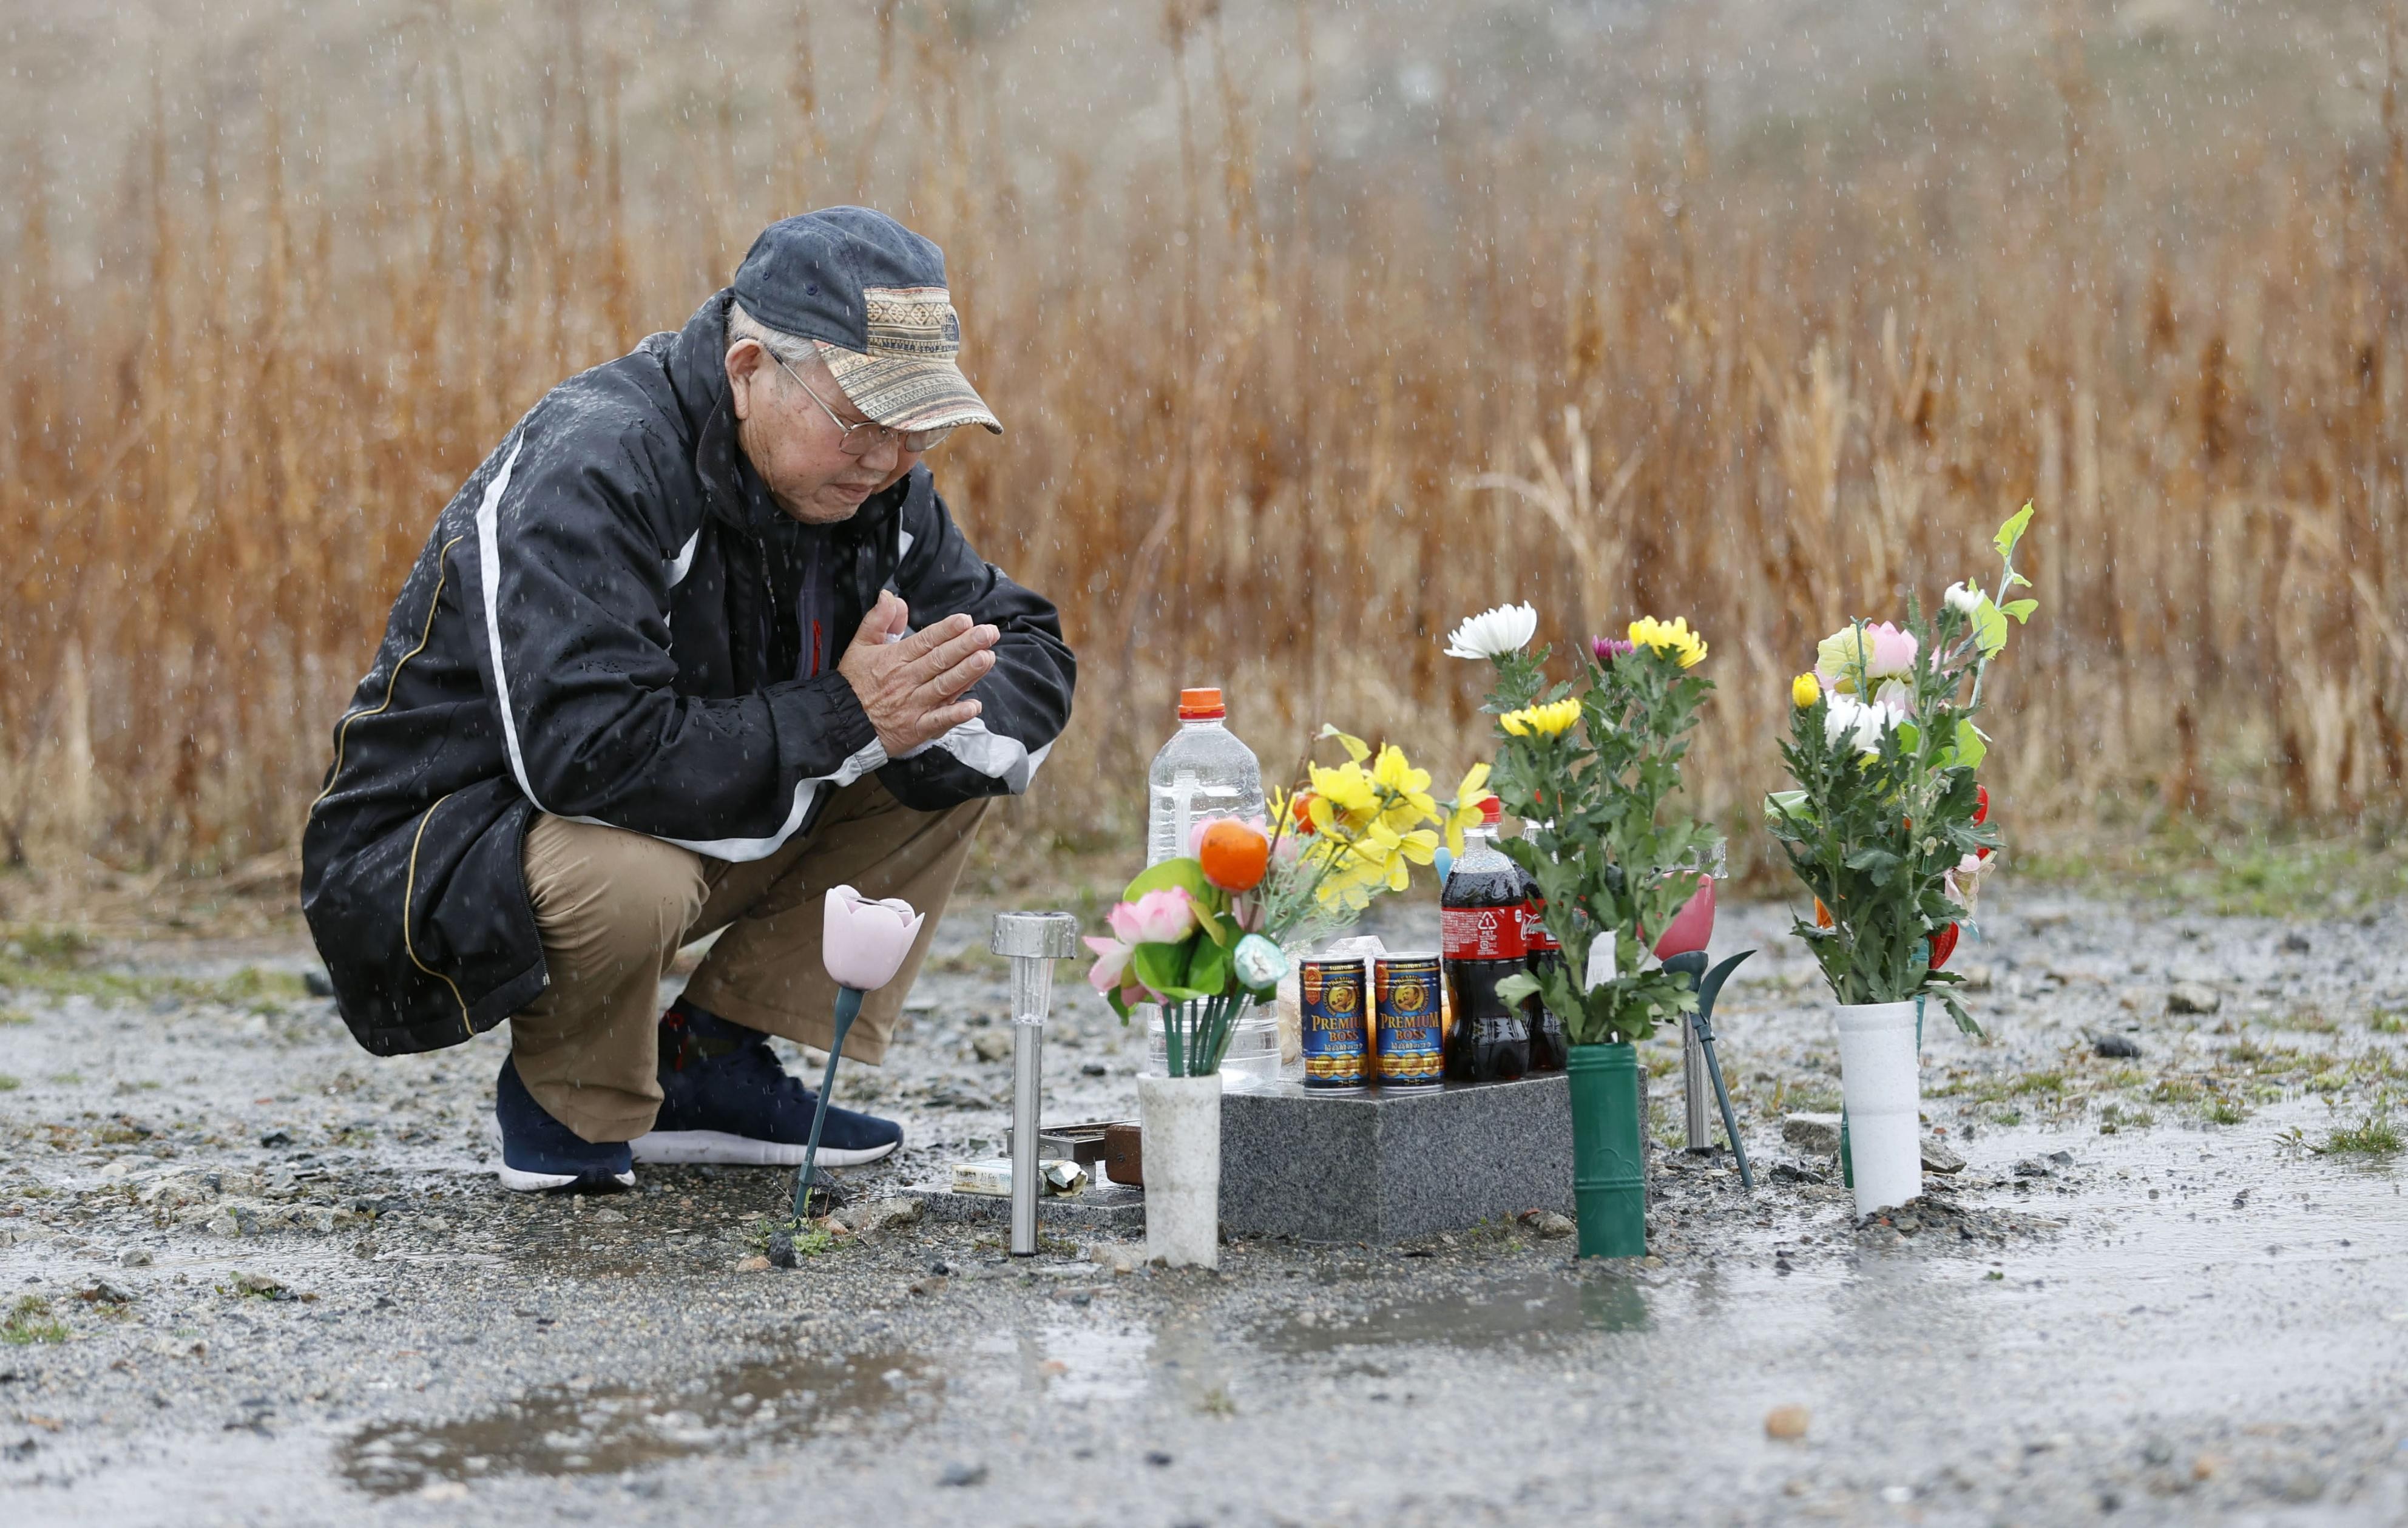 A bereaved father mourns his lost son, who went missing in the tsunami, at a memorial in Namie, Fukushima Prefecture, on Monday. Photo: Kyodo